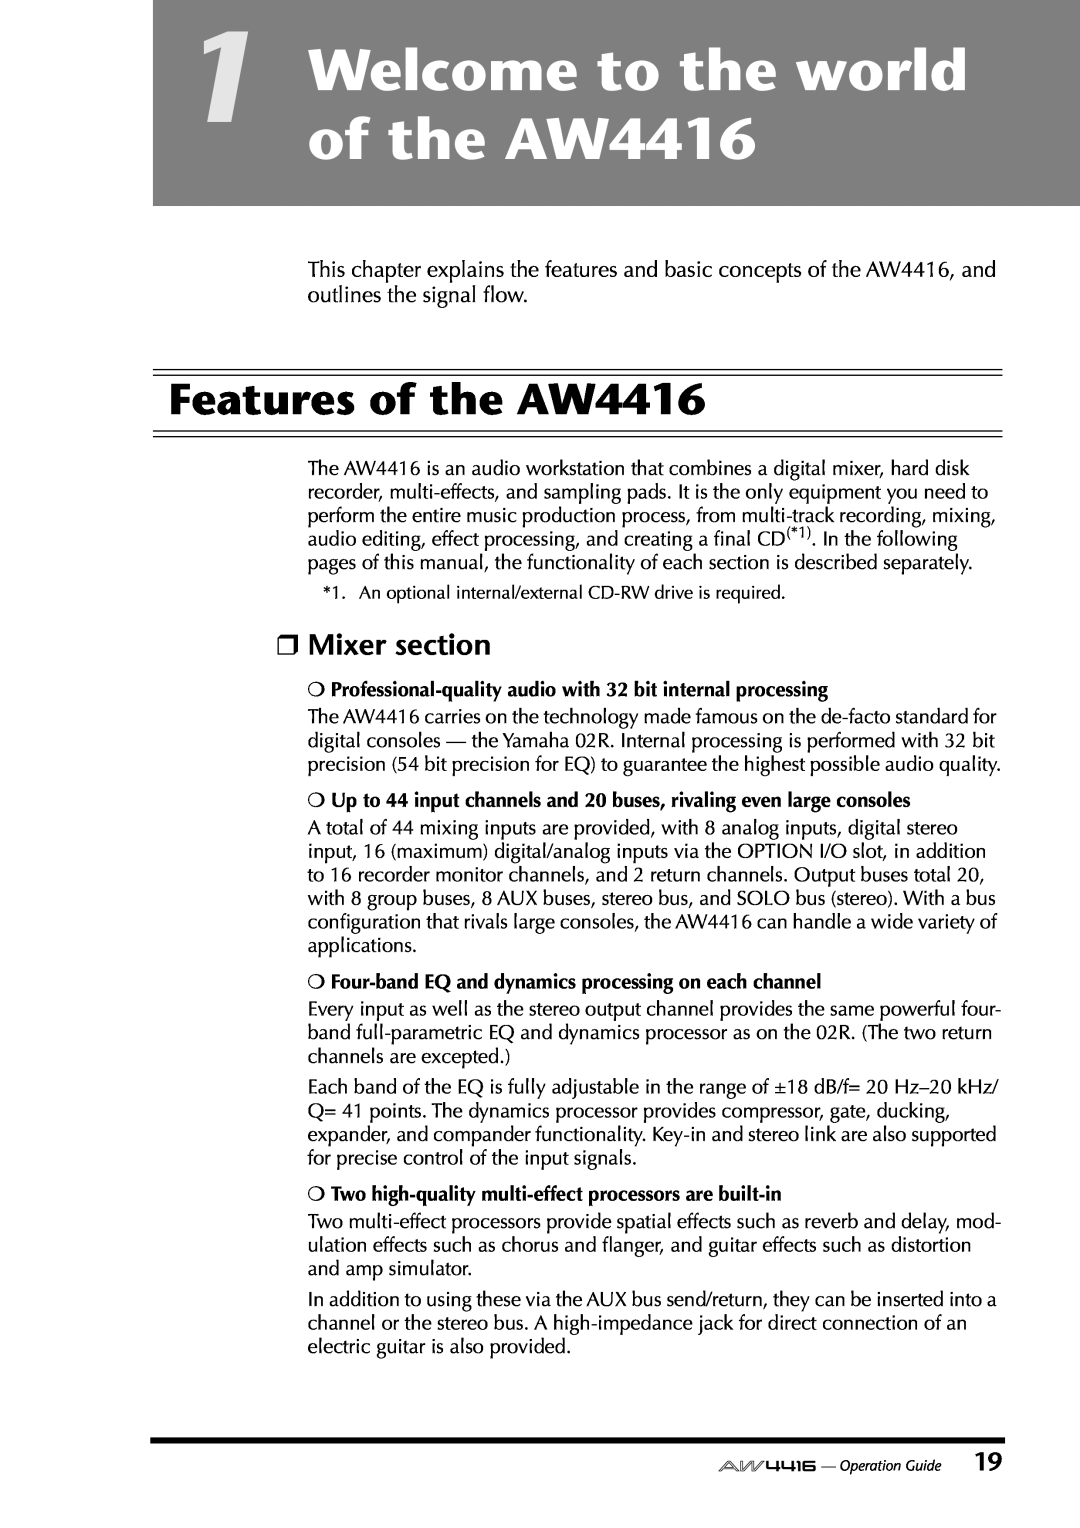 Yamaha manual Welcome to the world of the AW4416, Features of the AW4416, Mixer section 